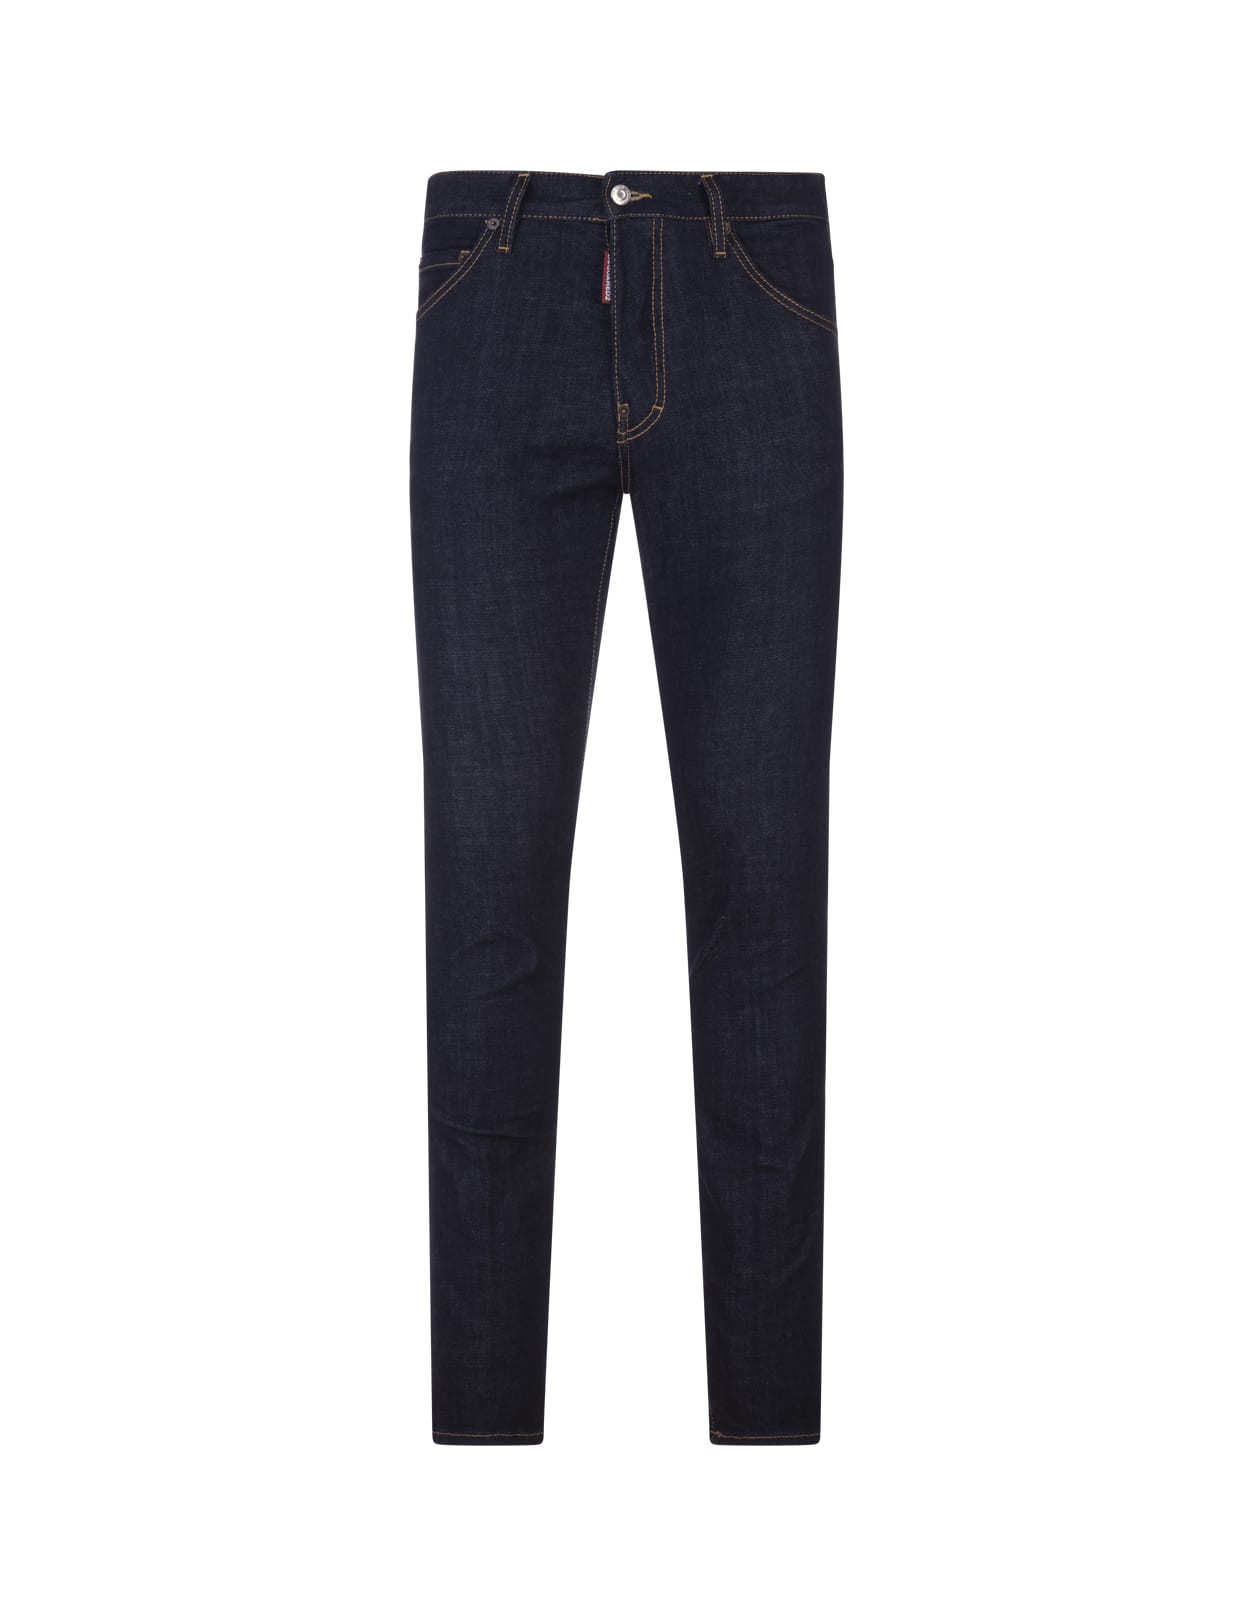 Dsquared2 Man Dark Rinse Wash Cool Guy Jeans